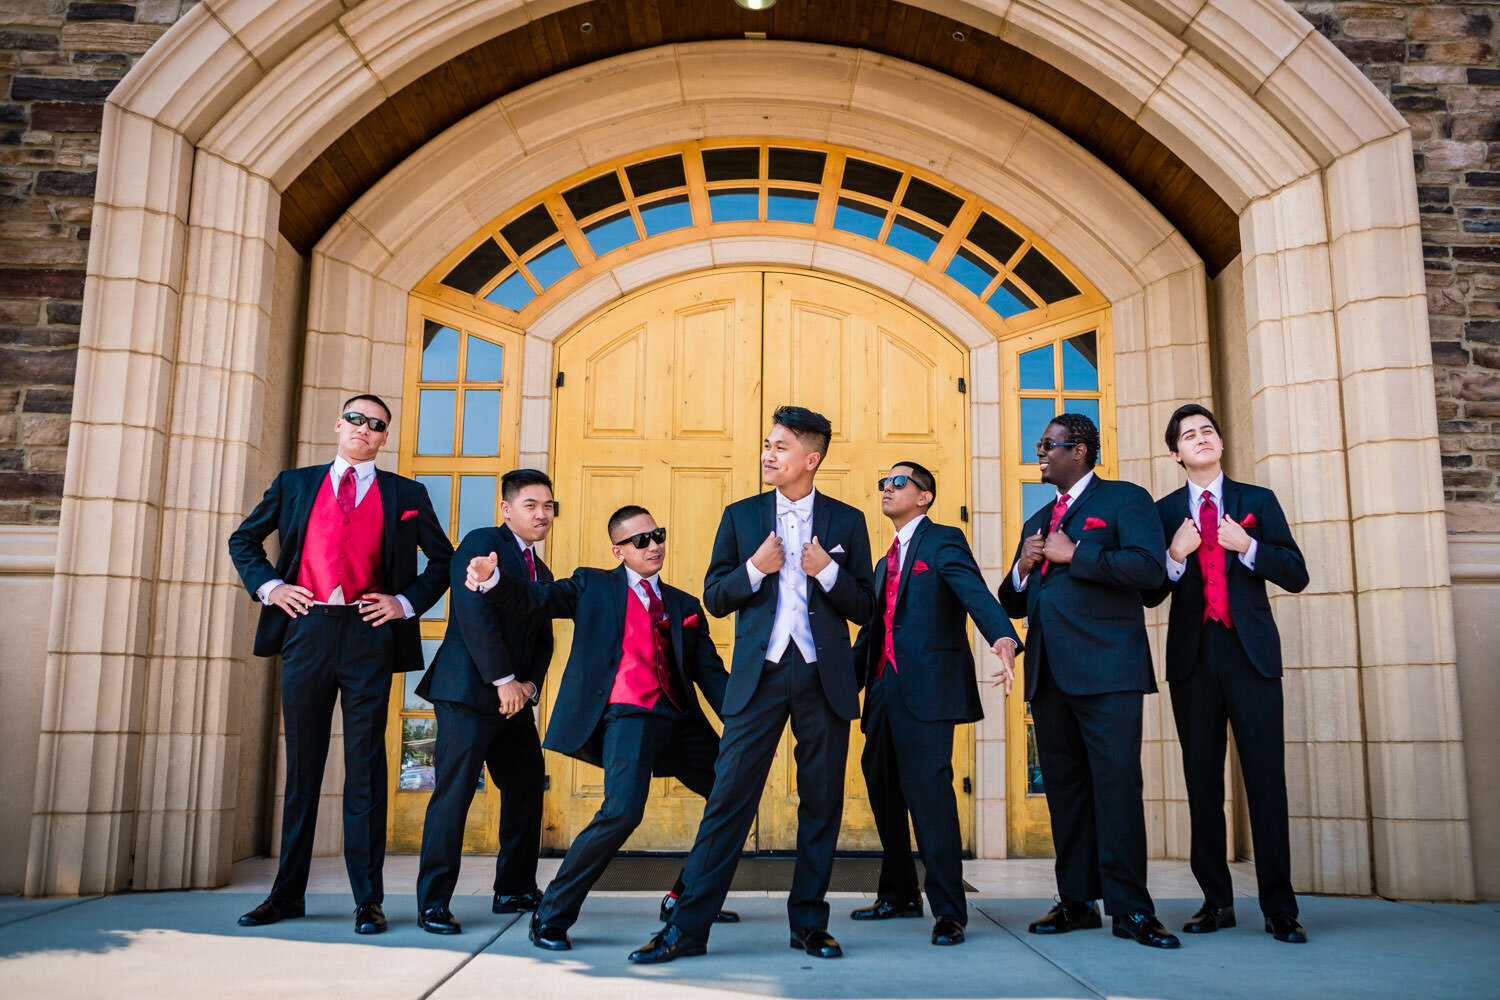  Blackstone Country Club wedding by JMGant Photography. Groomsmen hanging out!&nbsp;    